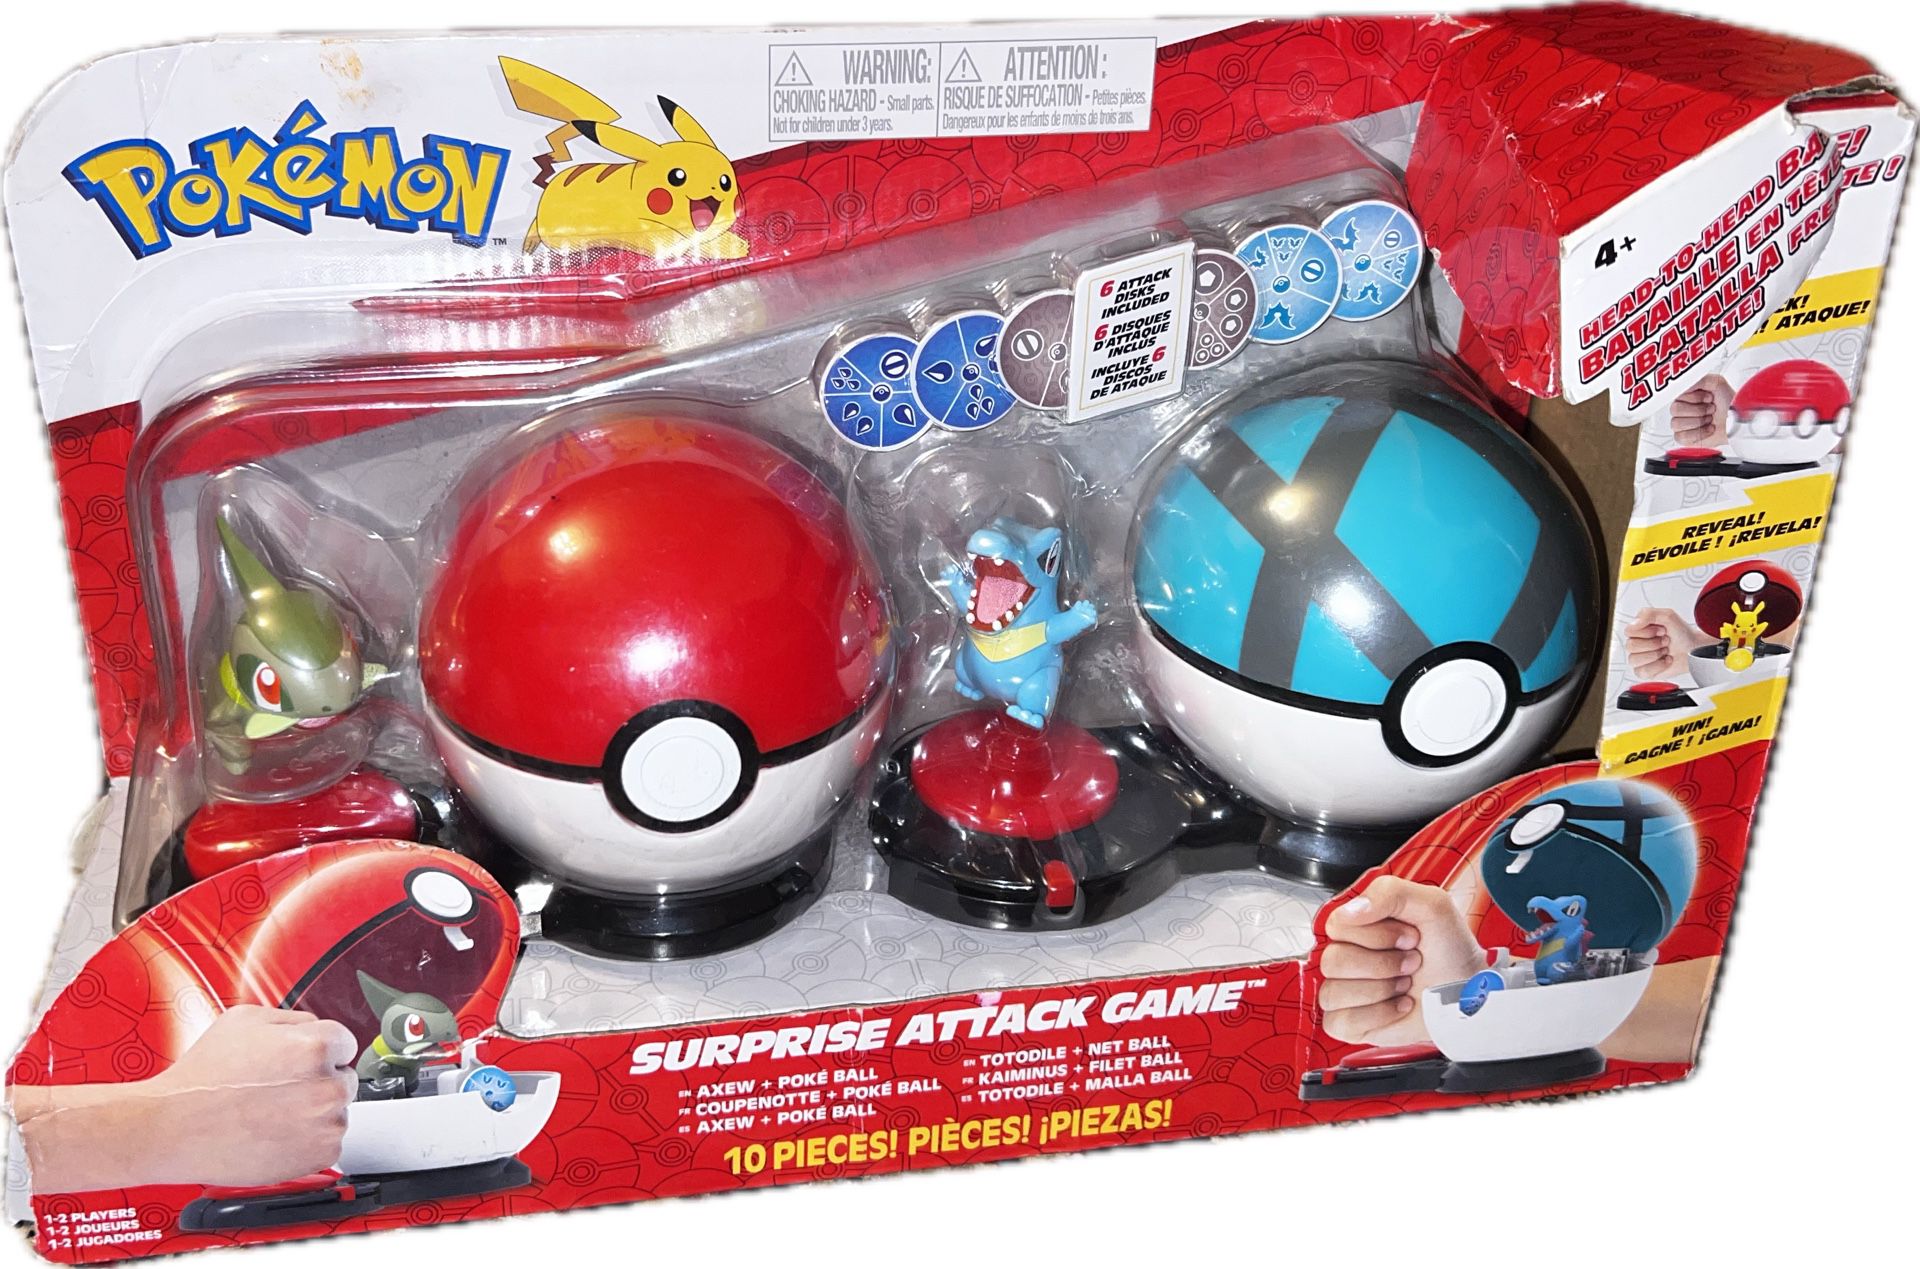 Pokémon Axew with Poké Ball vs Totodile with Net Ball Surprise Attack Game - NEW